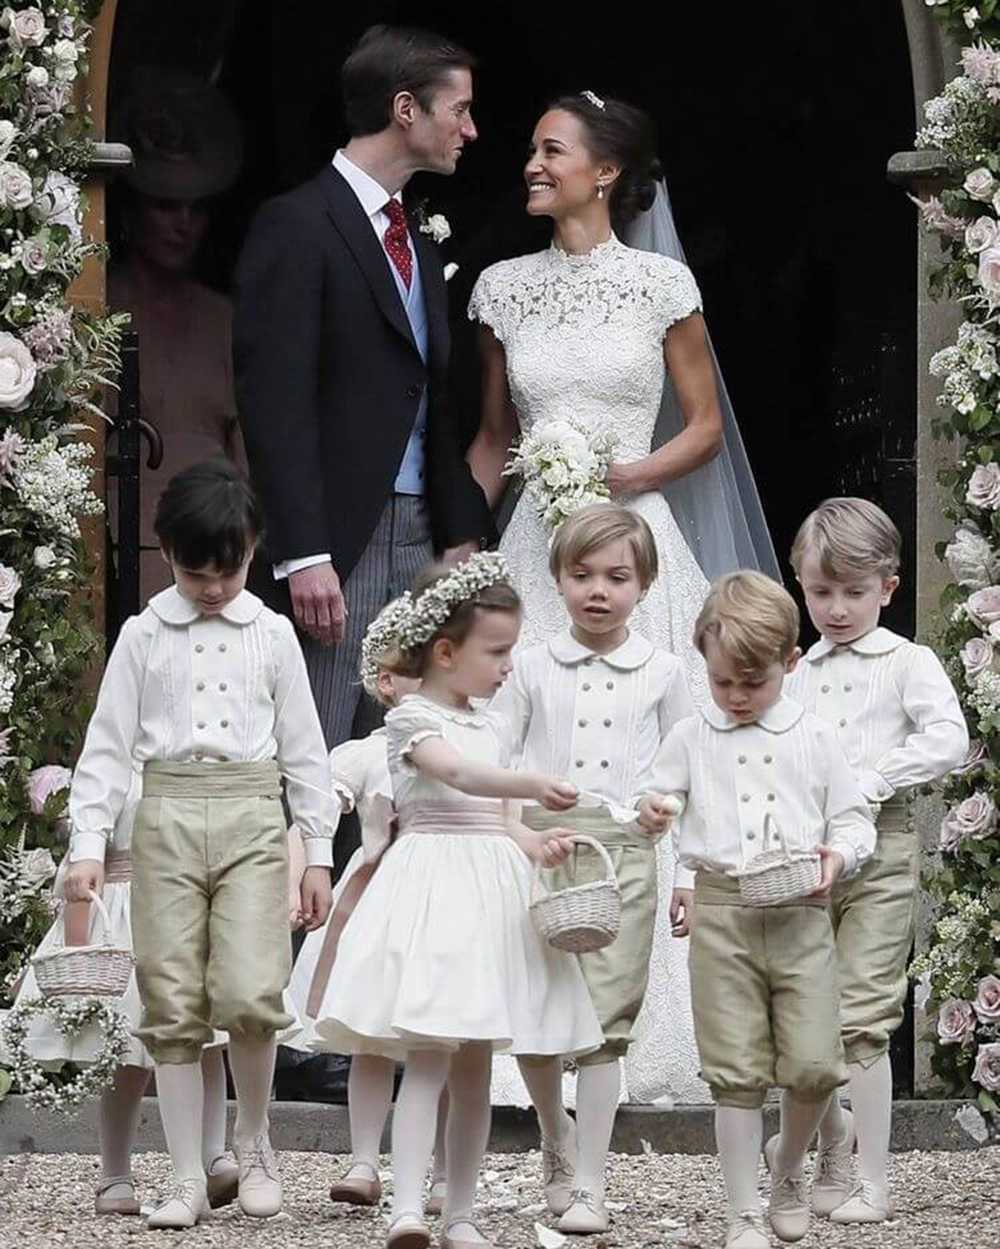 The Southern Flower Girl and Ring Bearer with a Royal Nod